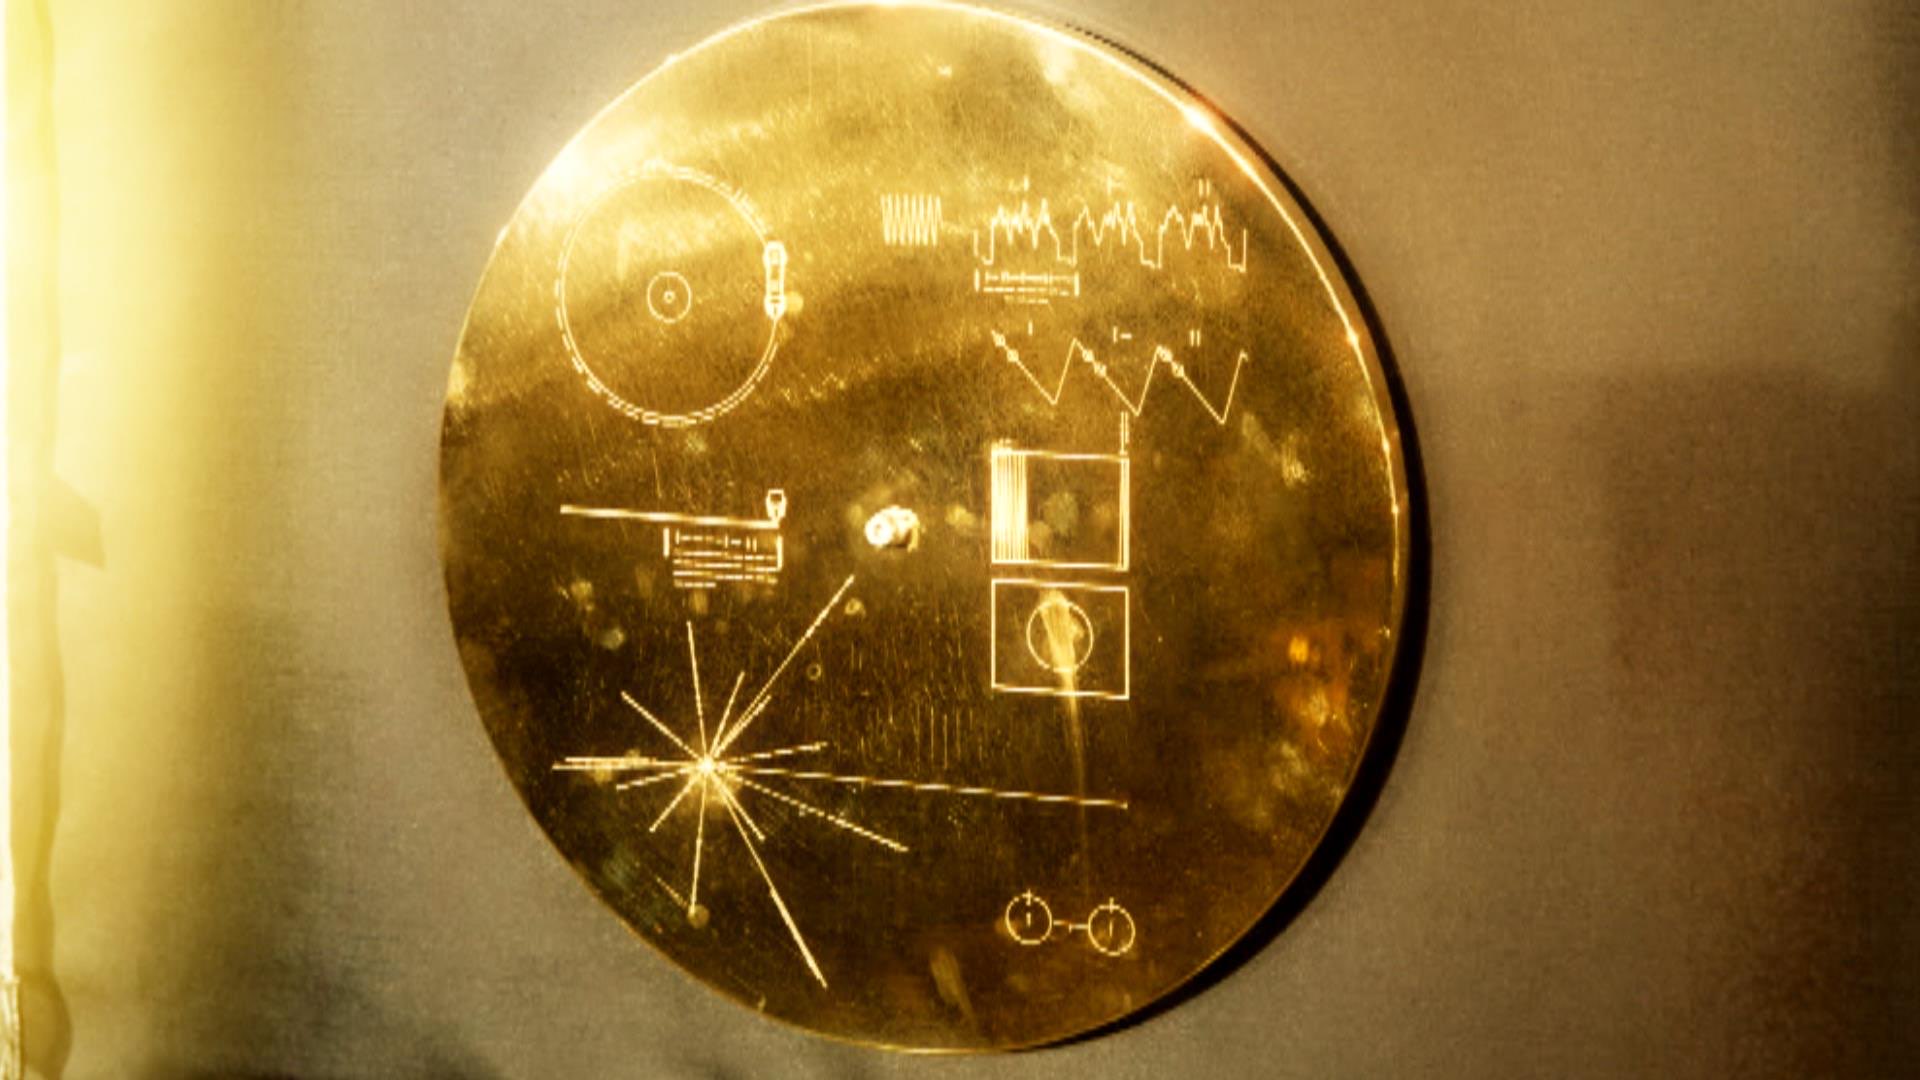 an angled picture of the cover of the golden record